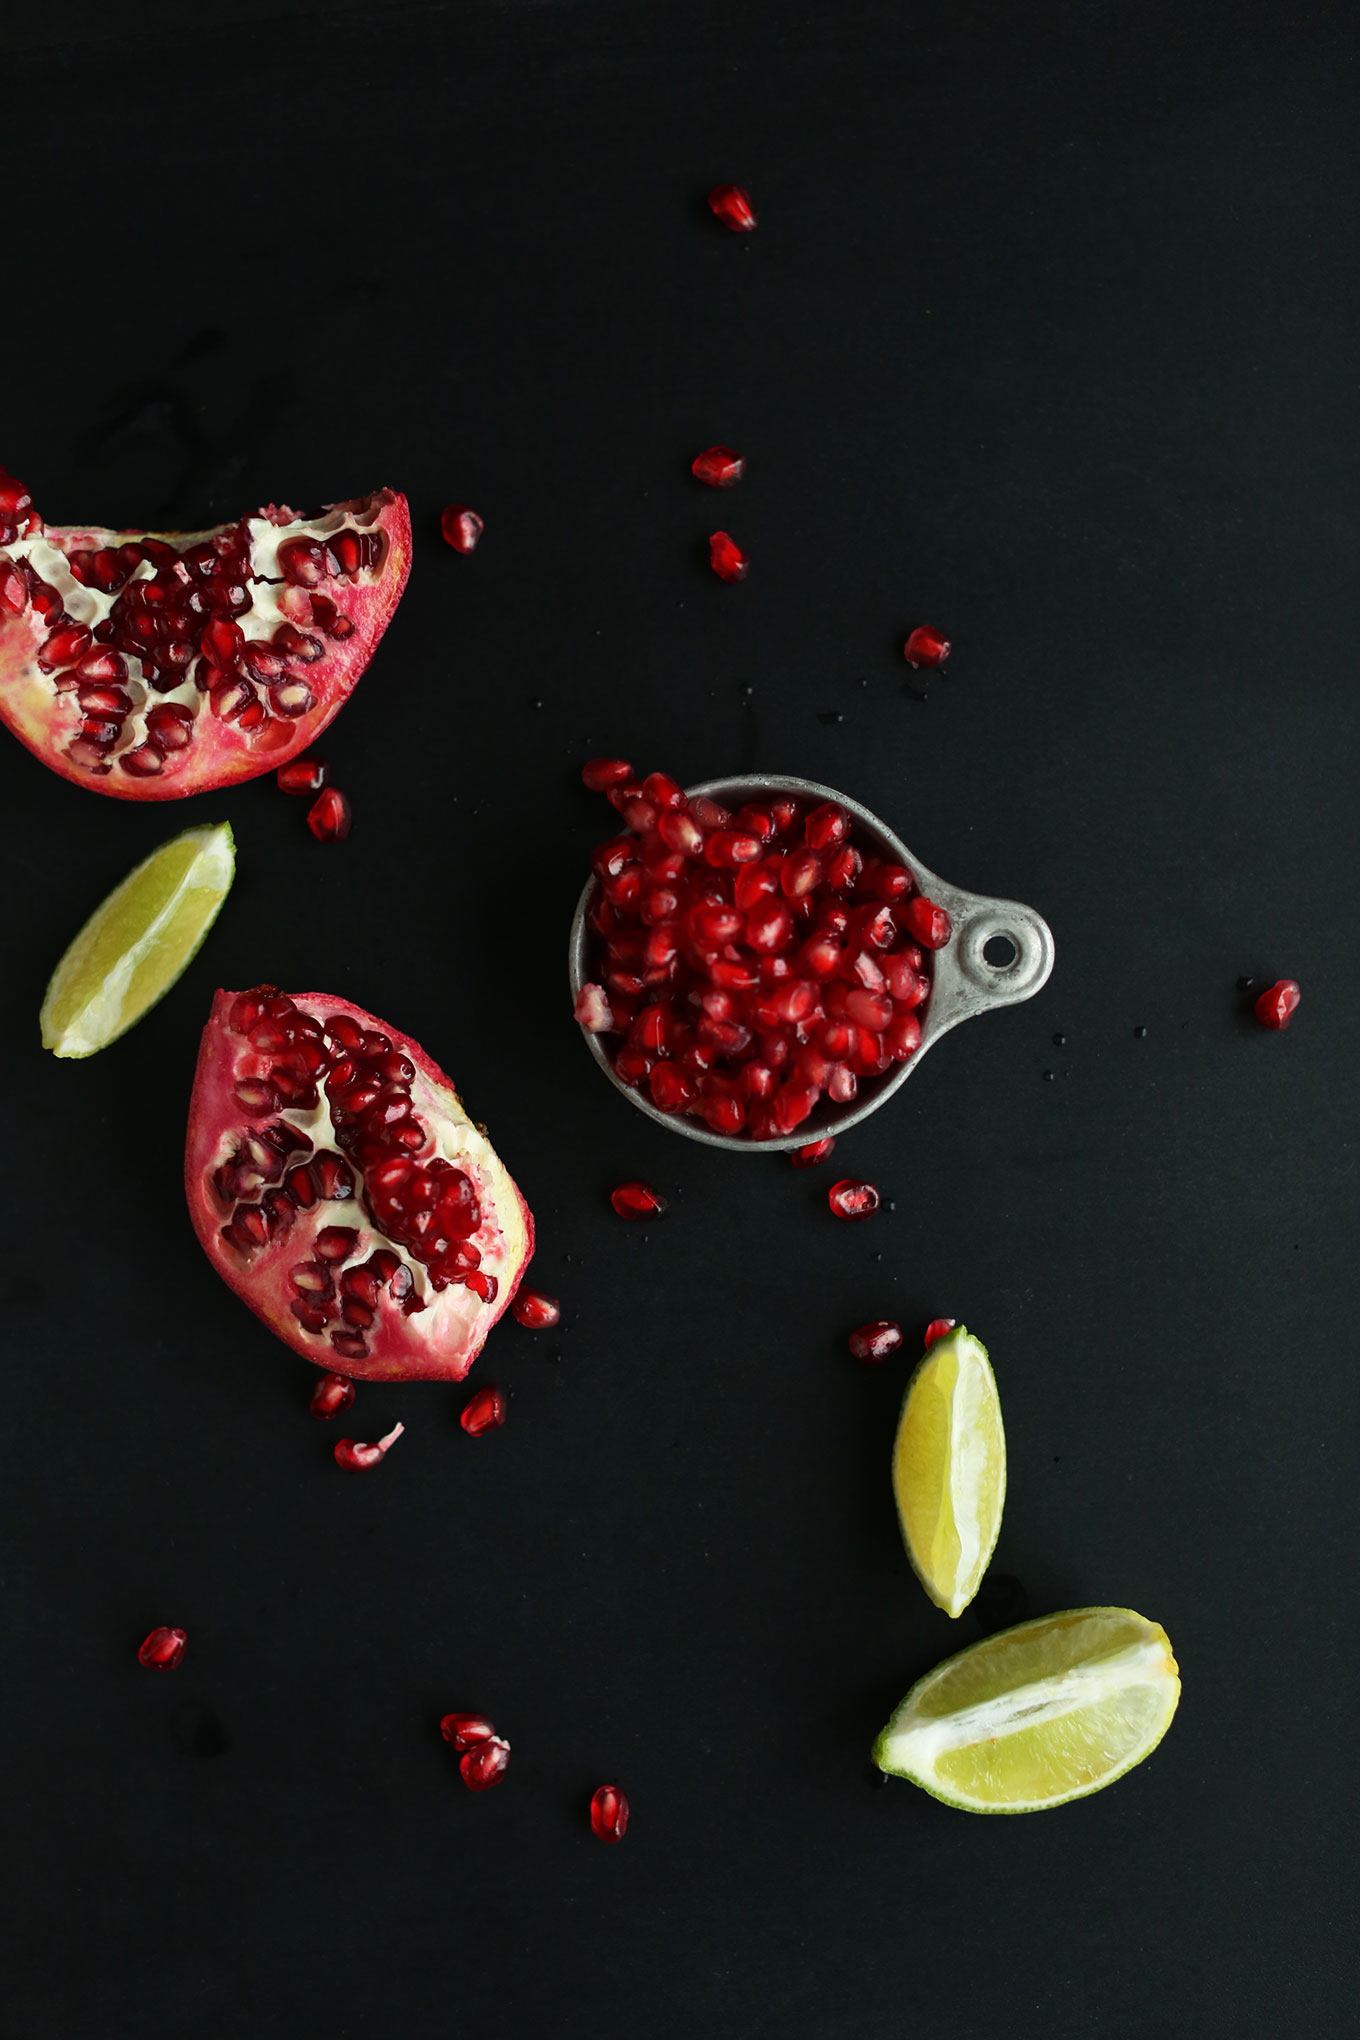 Pomegranate and limes for making vegan New Year's drinks